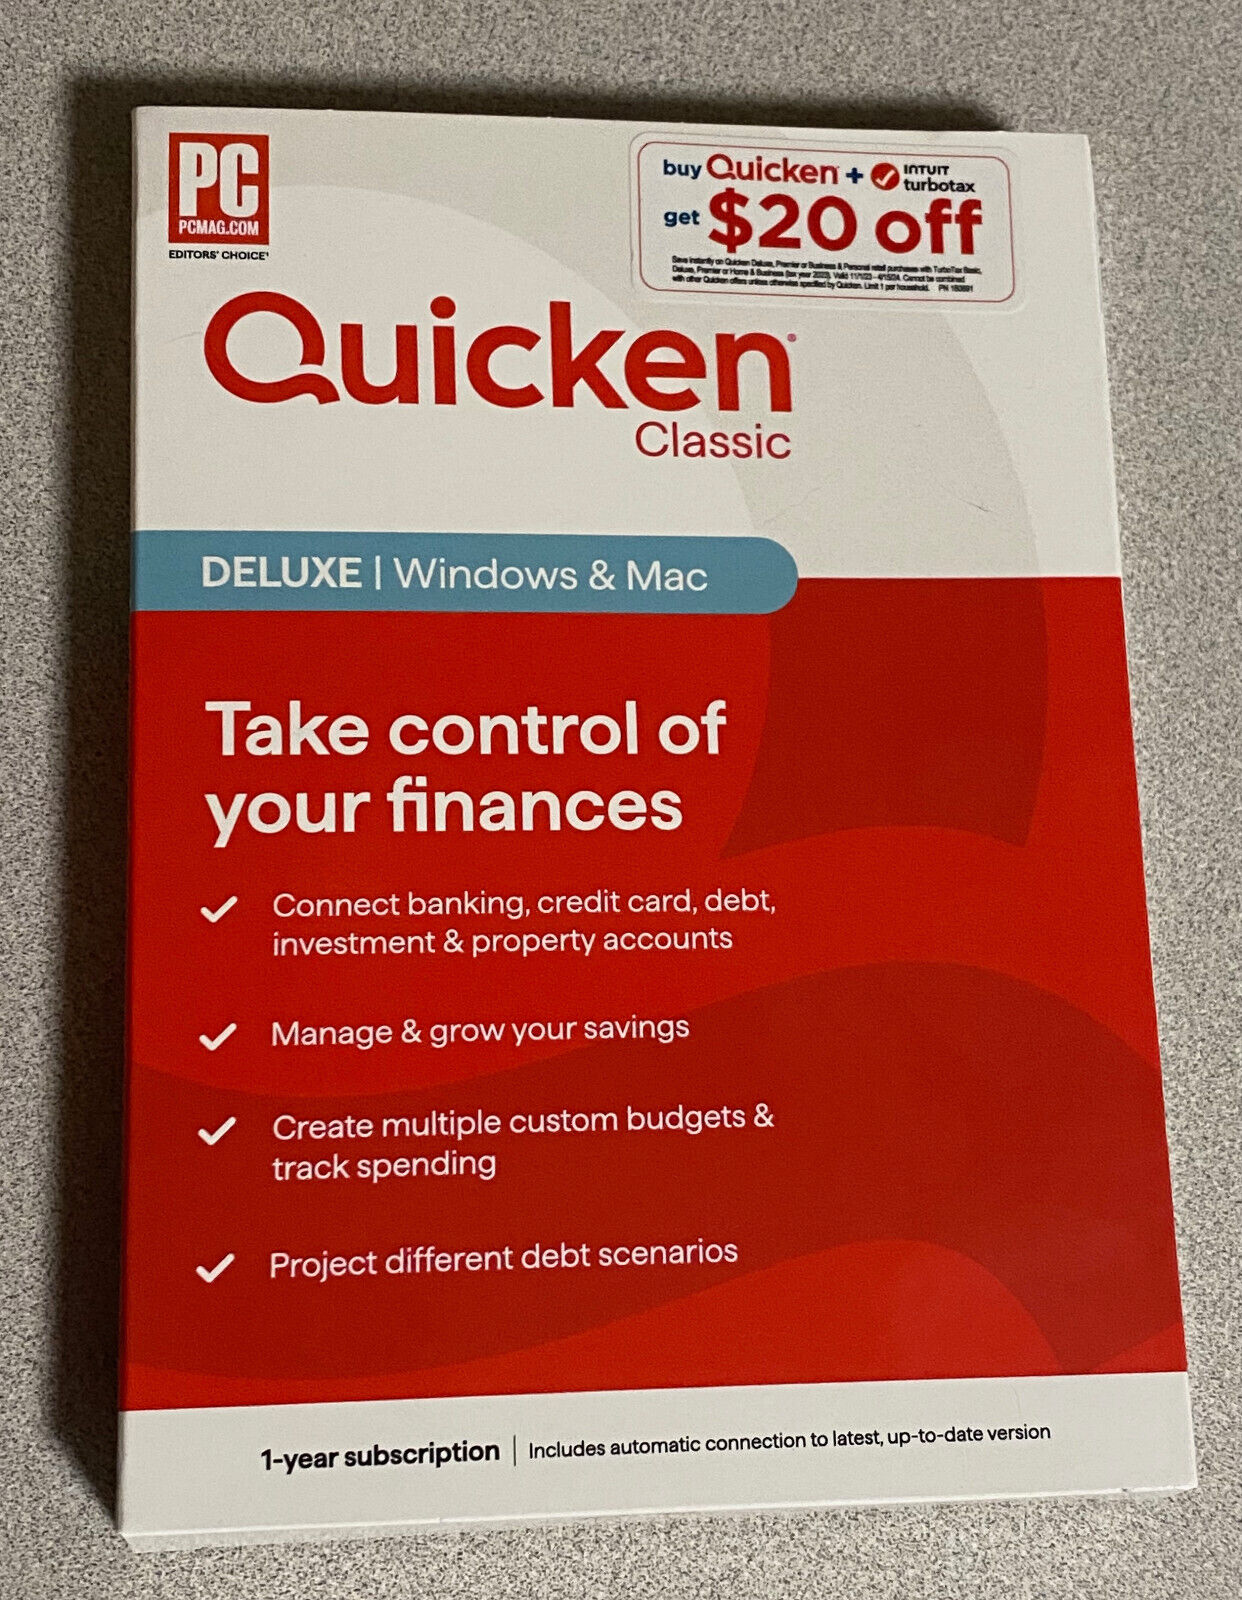 Quicken Classic Deluxe 1 Year Subscription Key Card New 170453 841798102145